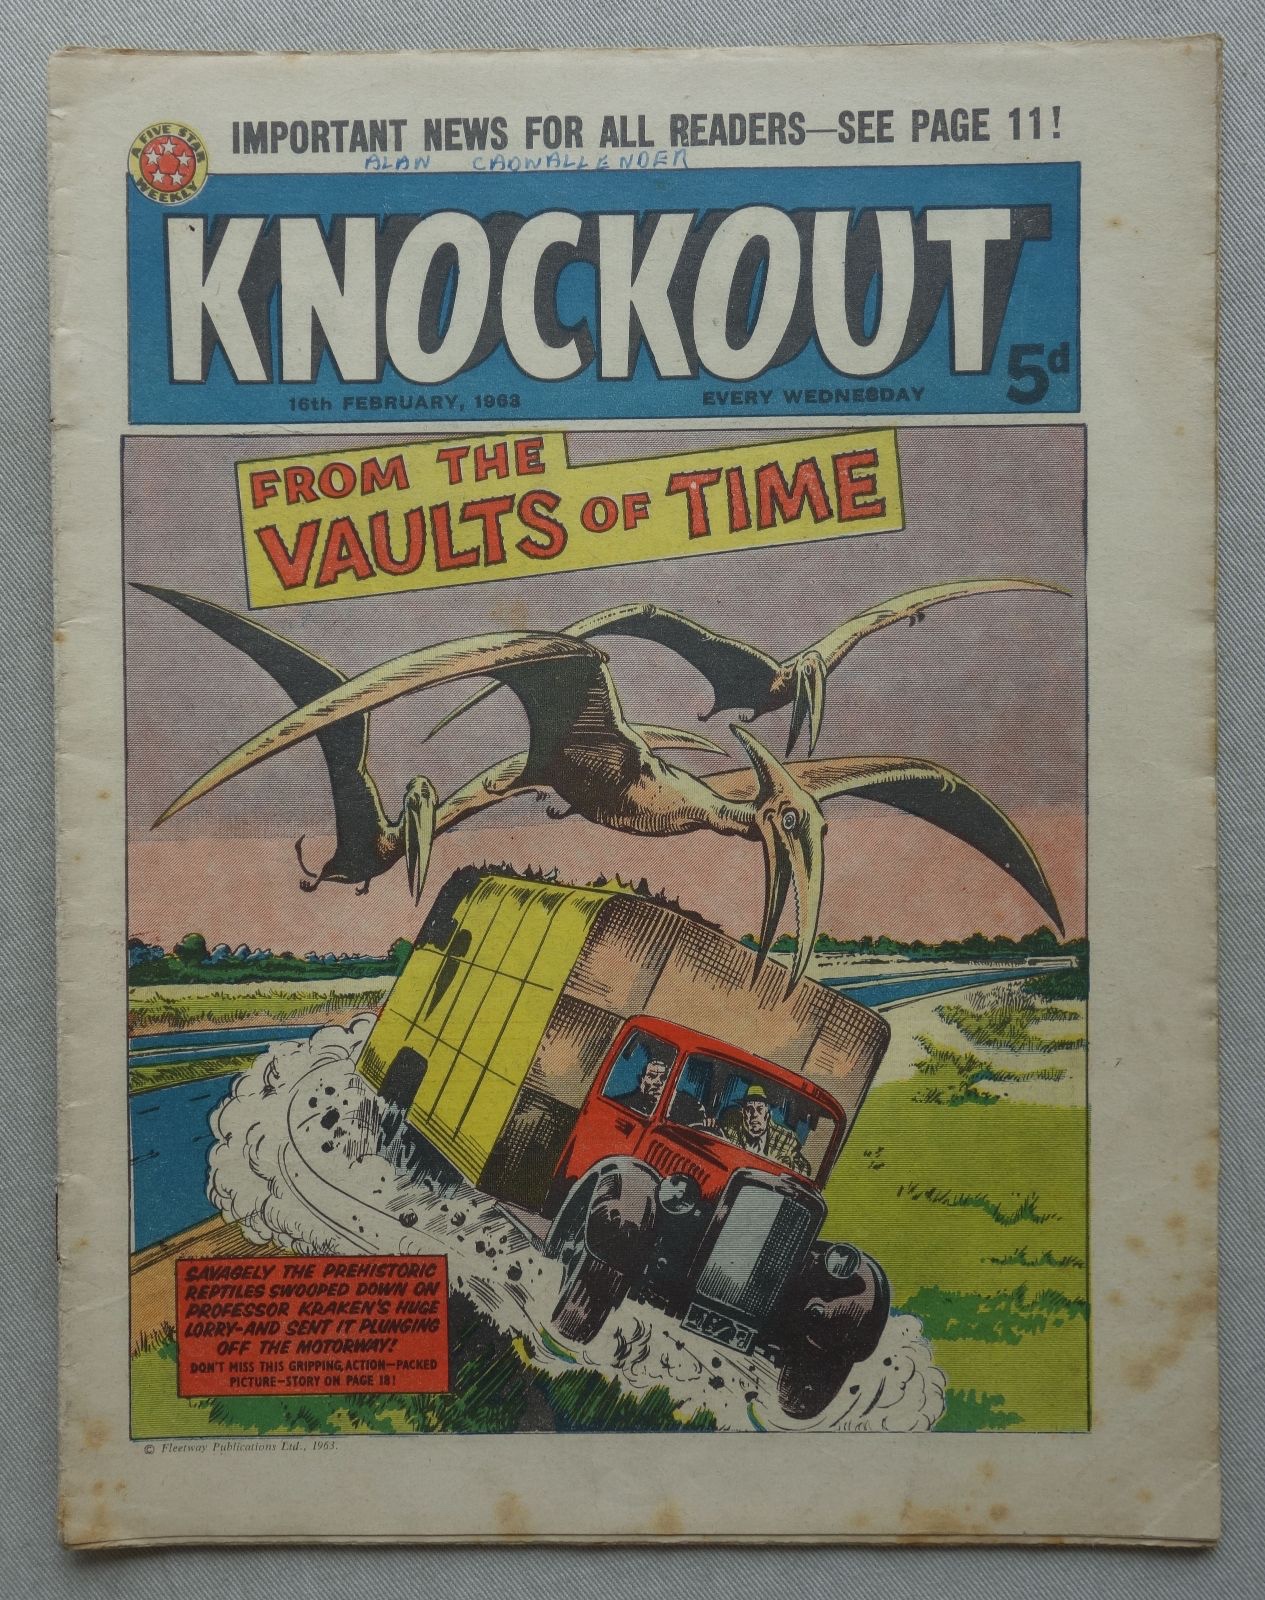 The final issue of Knockout, cover dated 16th February 1963